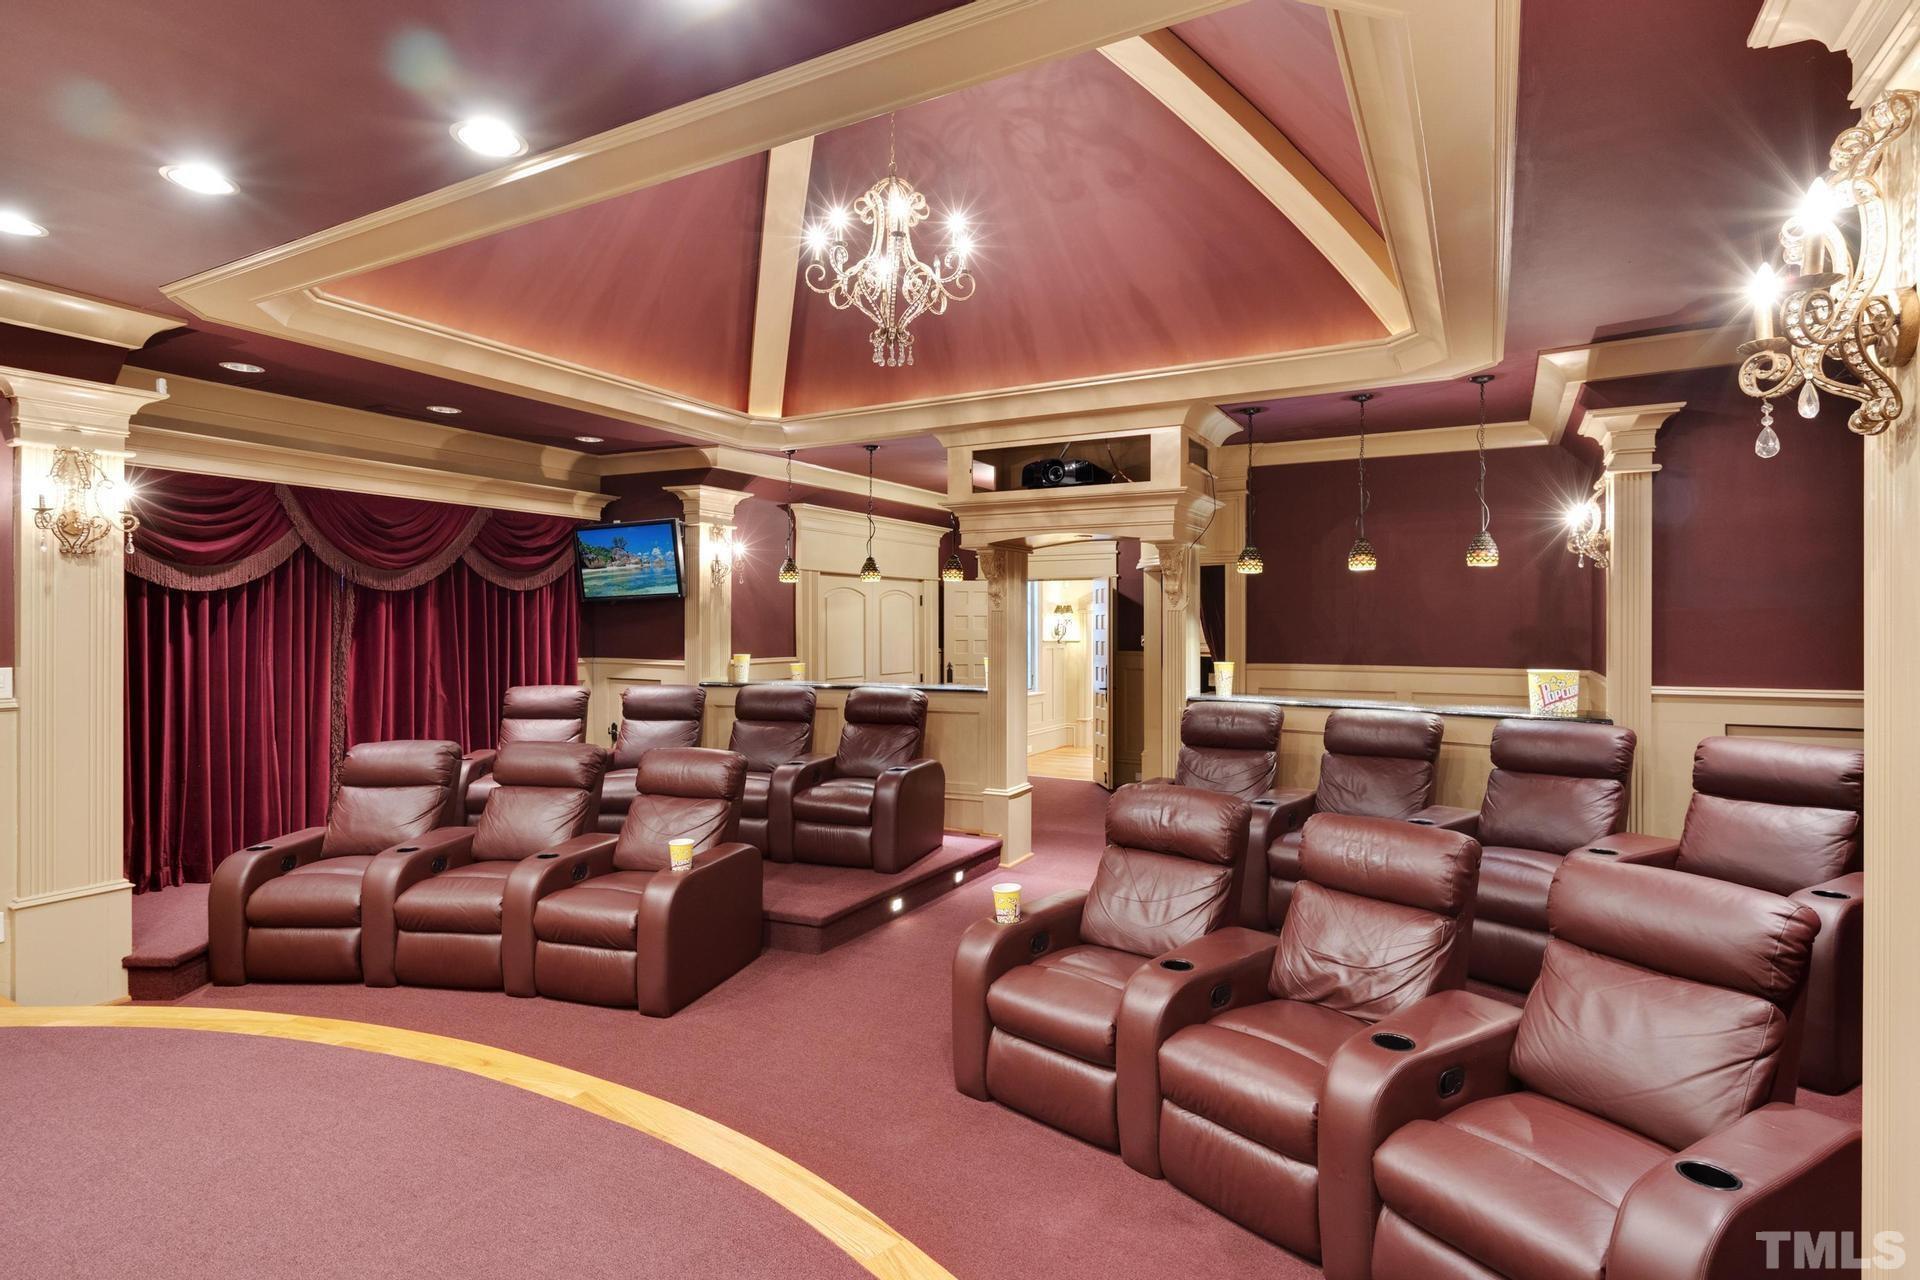 Feel like you are in an actual movie theater! 14 theater seats that recline and have drink holders. Stadium seating. Stadium lighting. Velvet Curtains. There is a stage as well for musical events, not just movies can be enjoyed here!